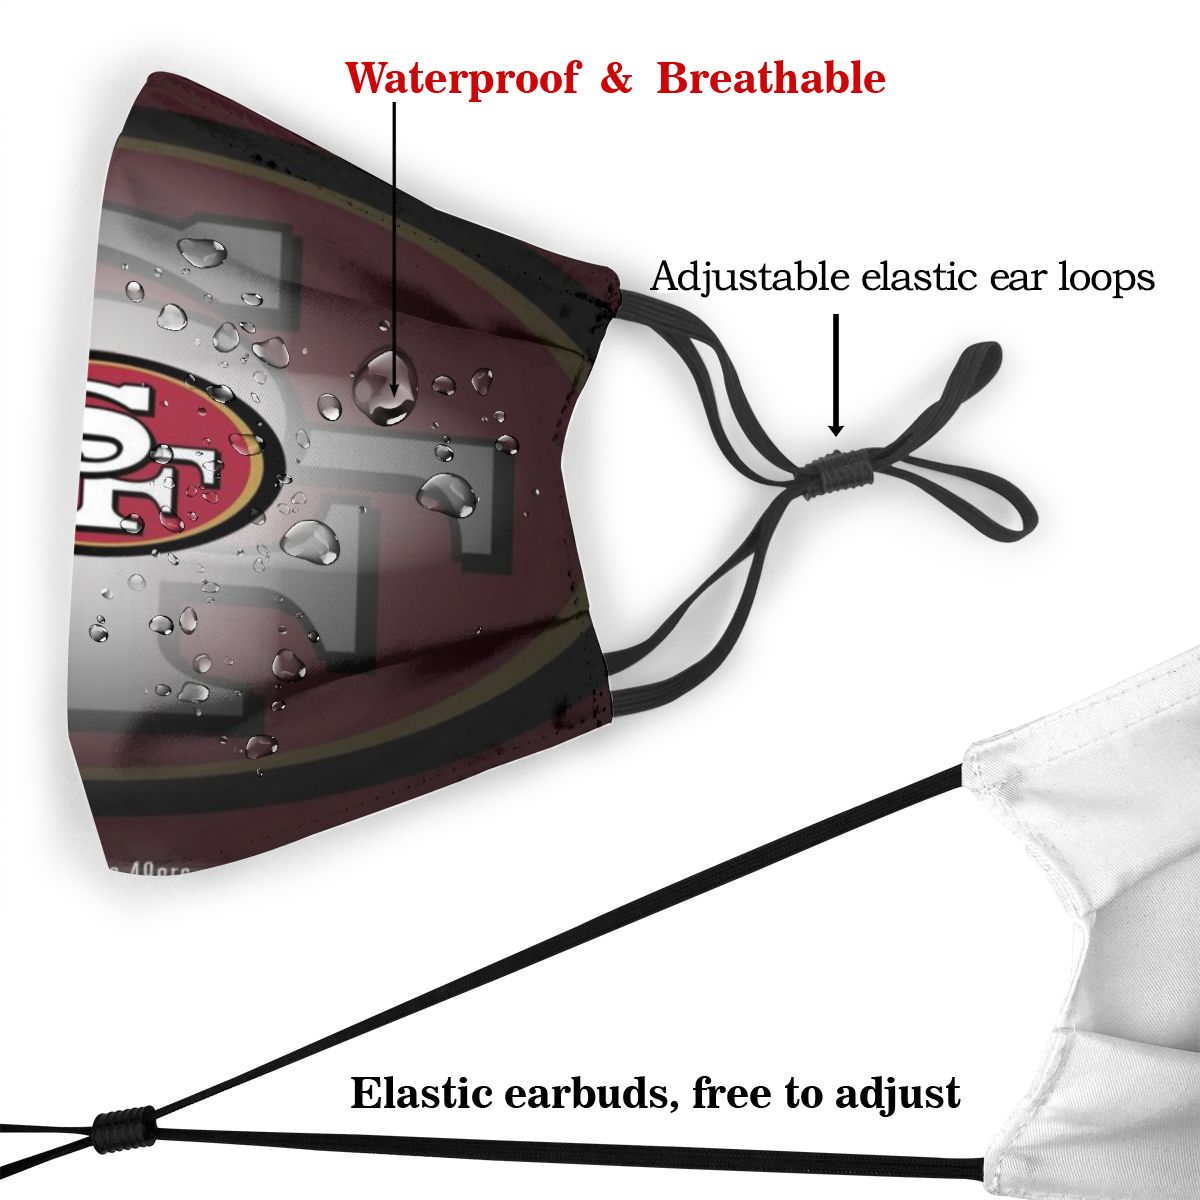 Print Personalized Football Design San Francisco 49ers Dust Mask With Filter